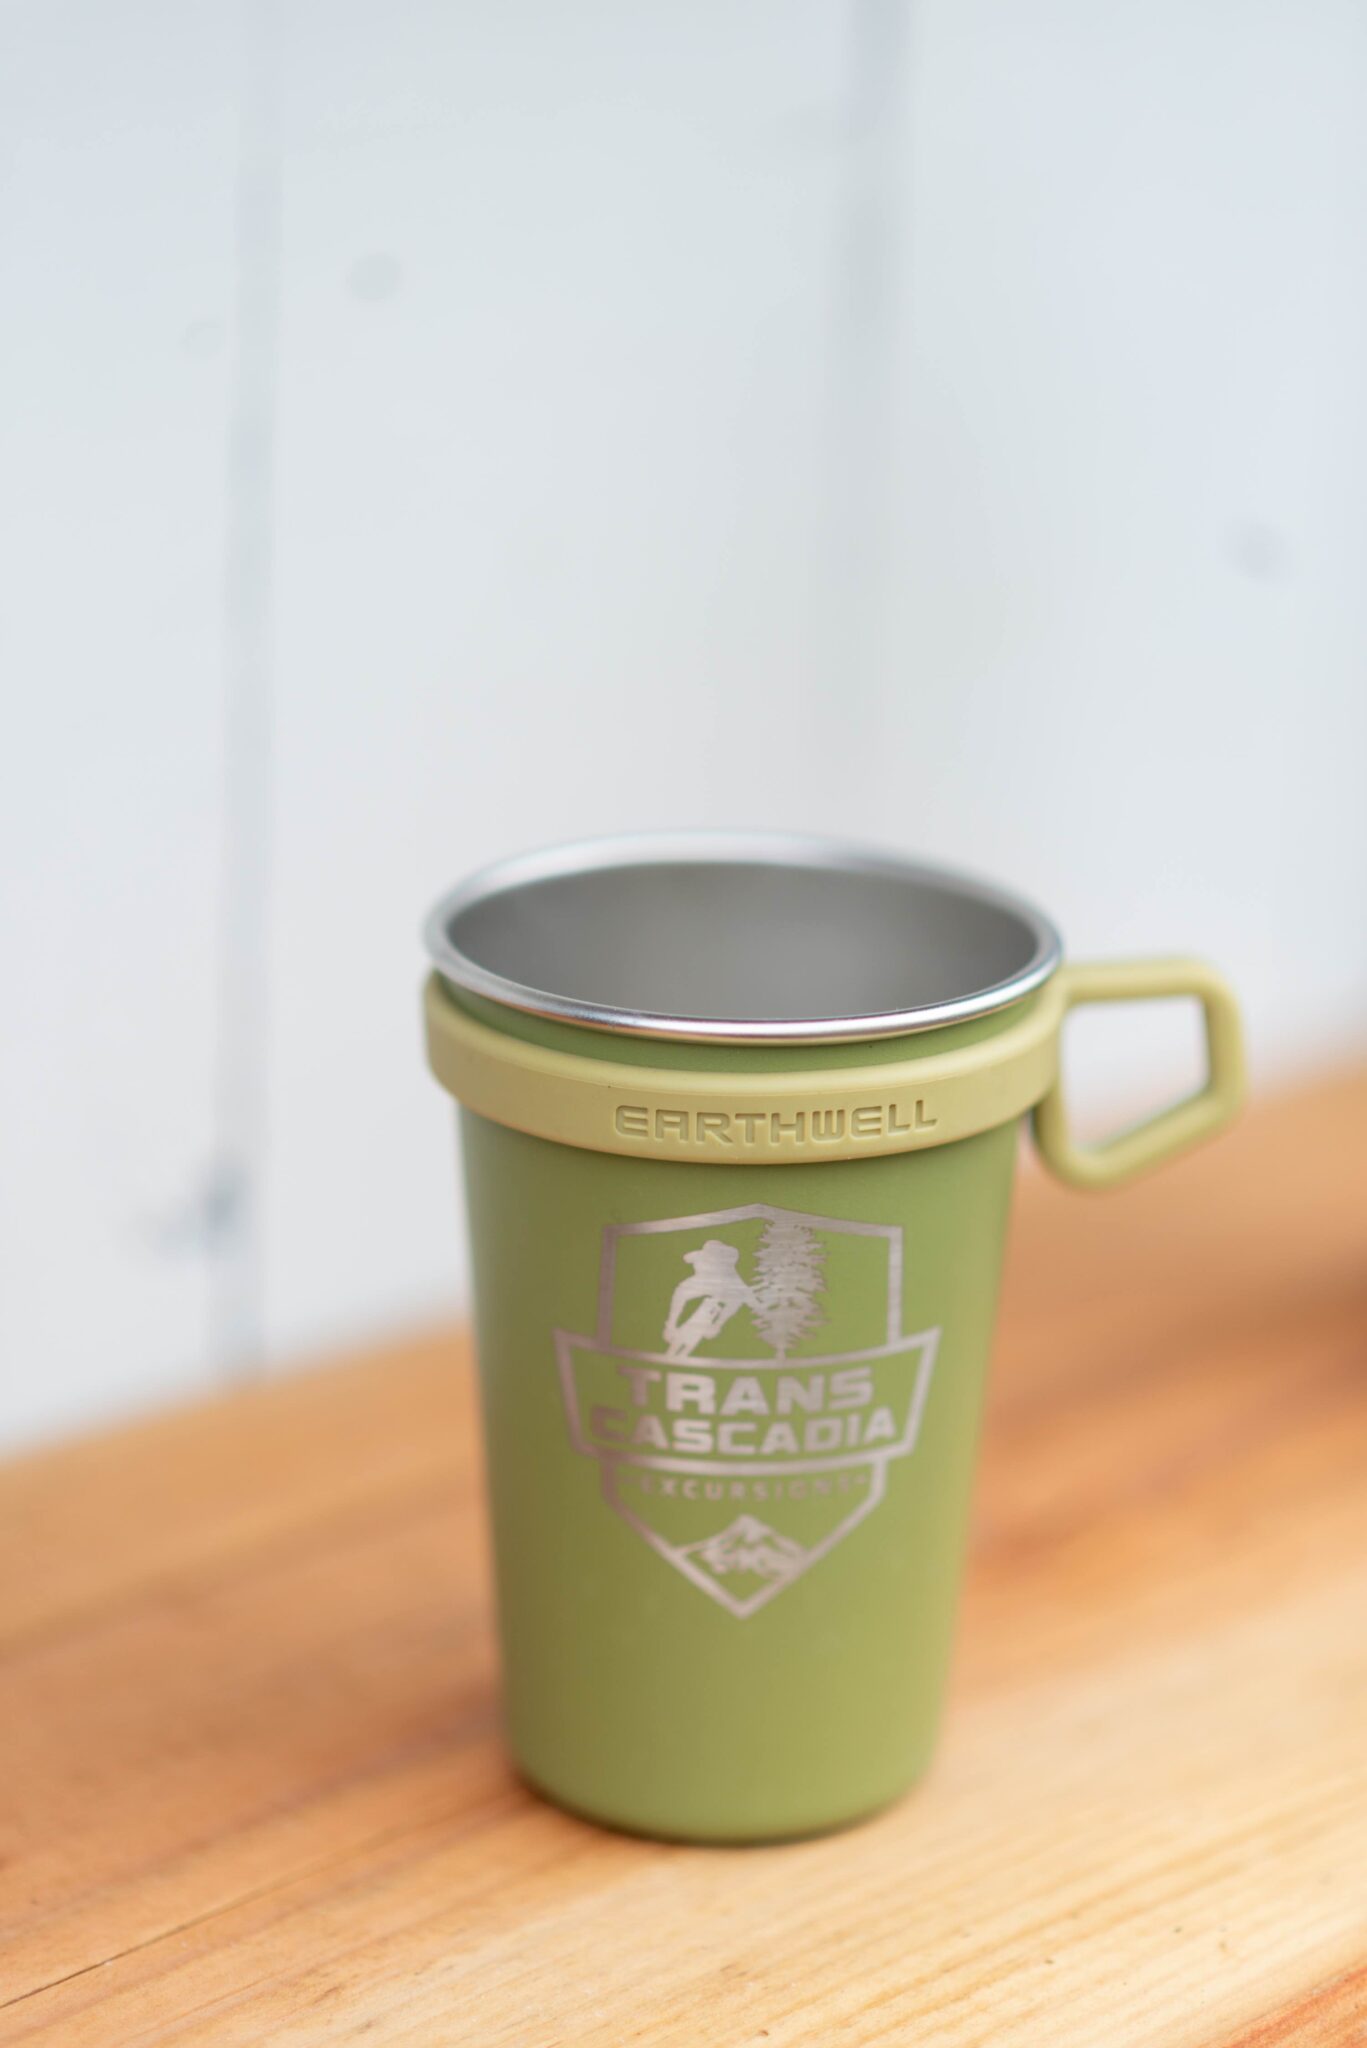 https://www.transcascadiaexcursions.com/wp-content/uploads/2021/08/TCE_Product-Mug_Green_Top-scaled.jpeg